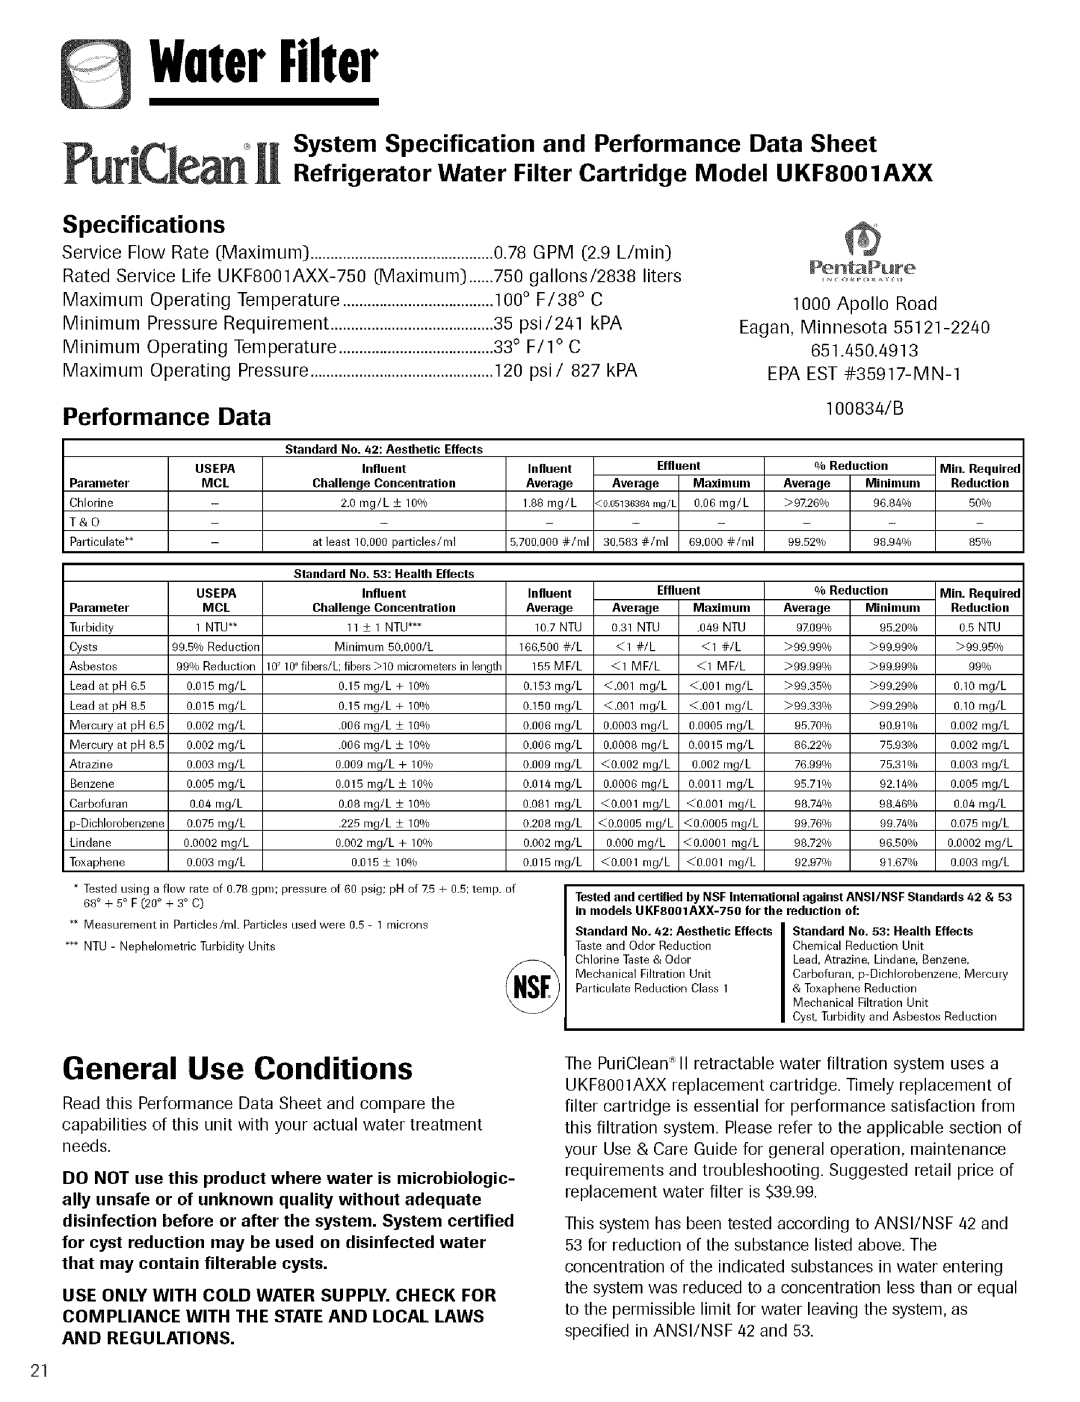 Maytag Refrigerator General Use Conditions, System Specification and Performance Data Sheet, Specifications, WaterFilter 